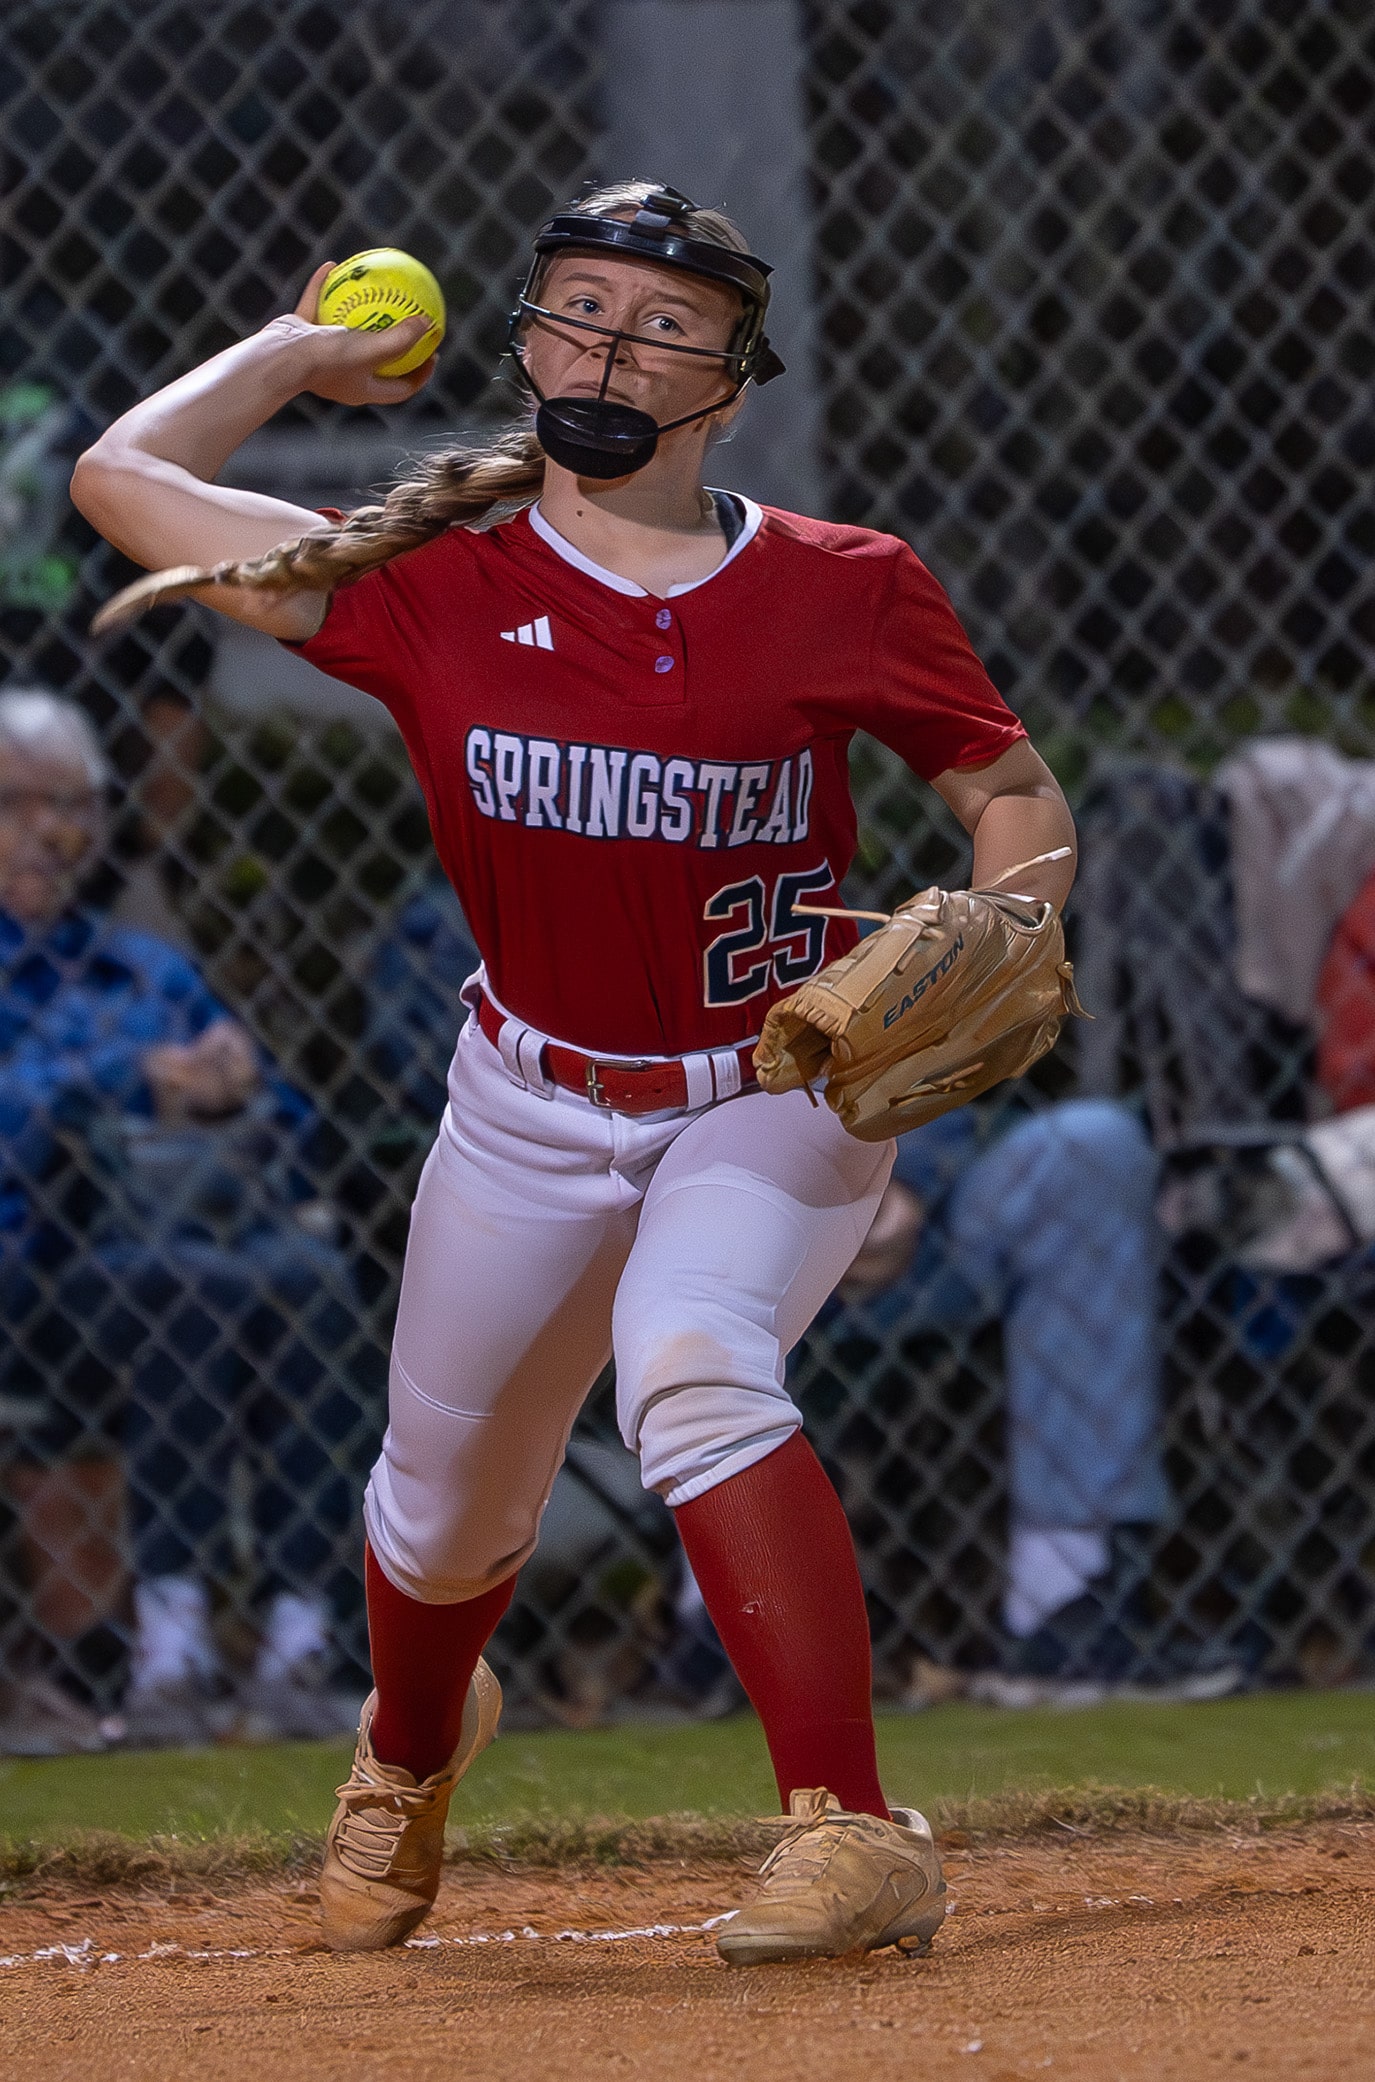 Springstead High, 25, third baseman Mackenzie Nester throws across the diamond on a bunt attempt Tuesday night in the game with visiting Weeki Wachee High. [Photo by Joe DiCristofalo]